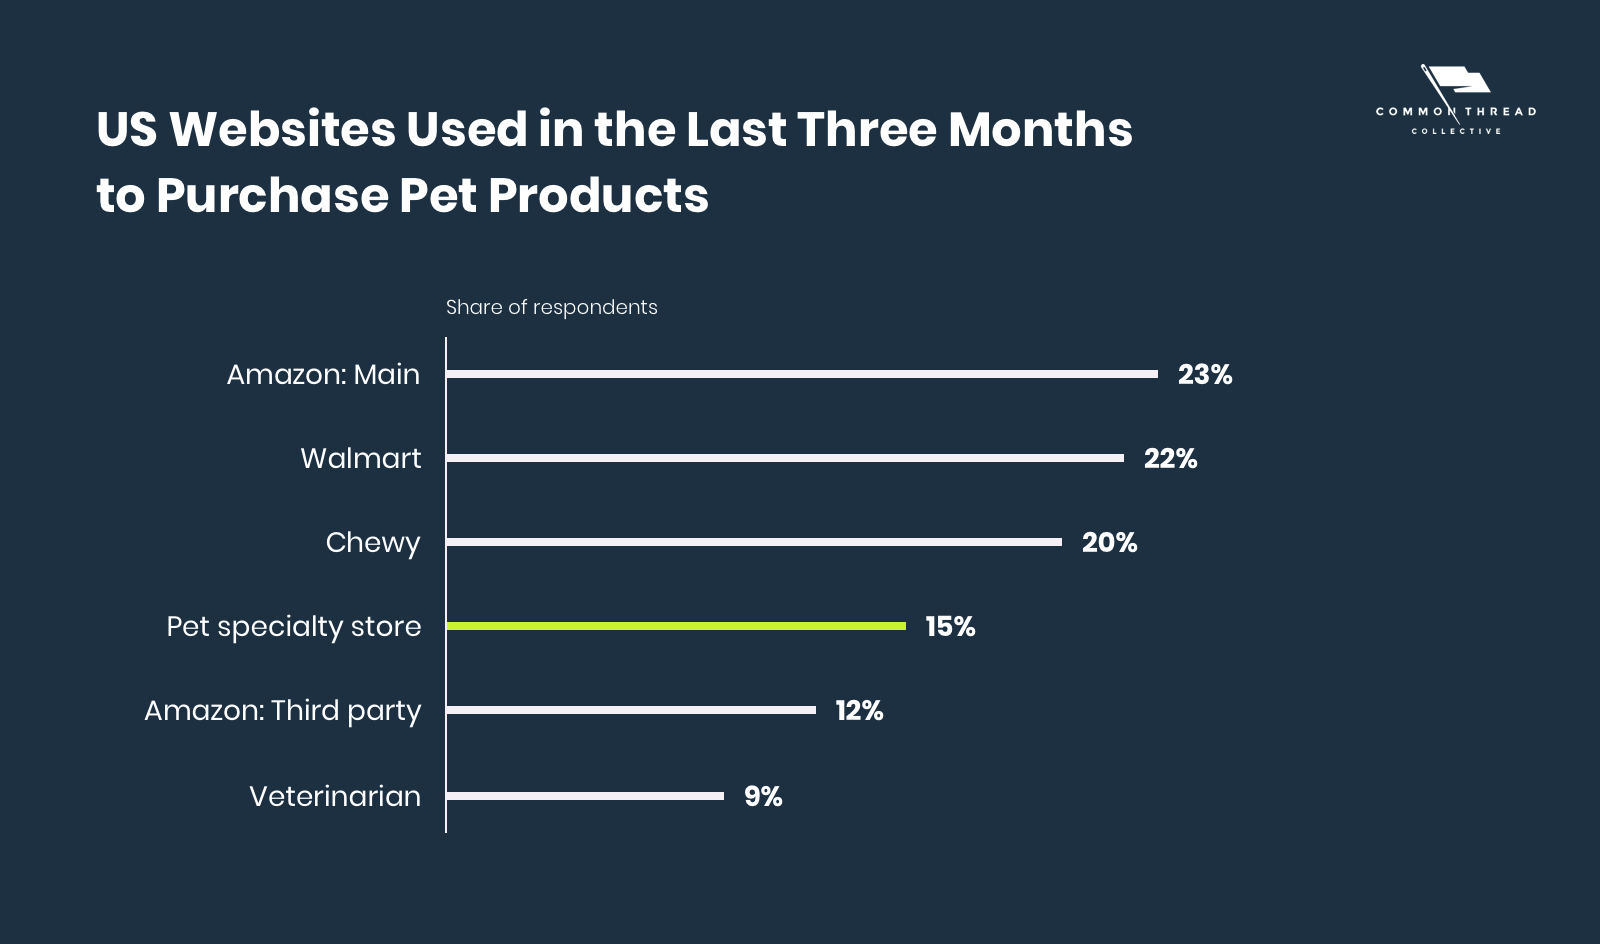 US Websites used in the last three months to purchase pet products